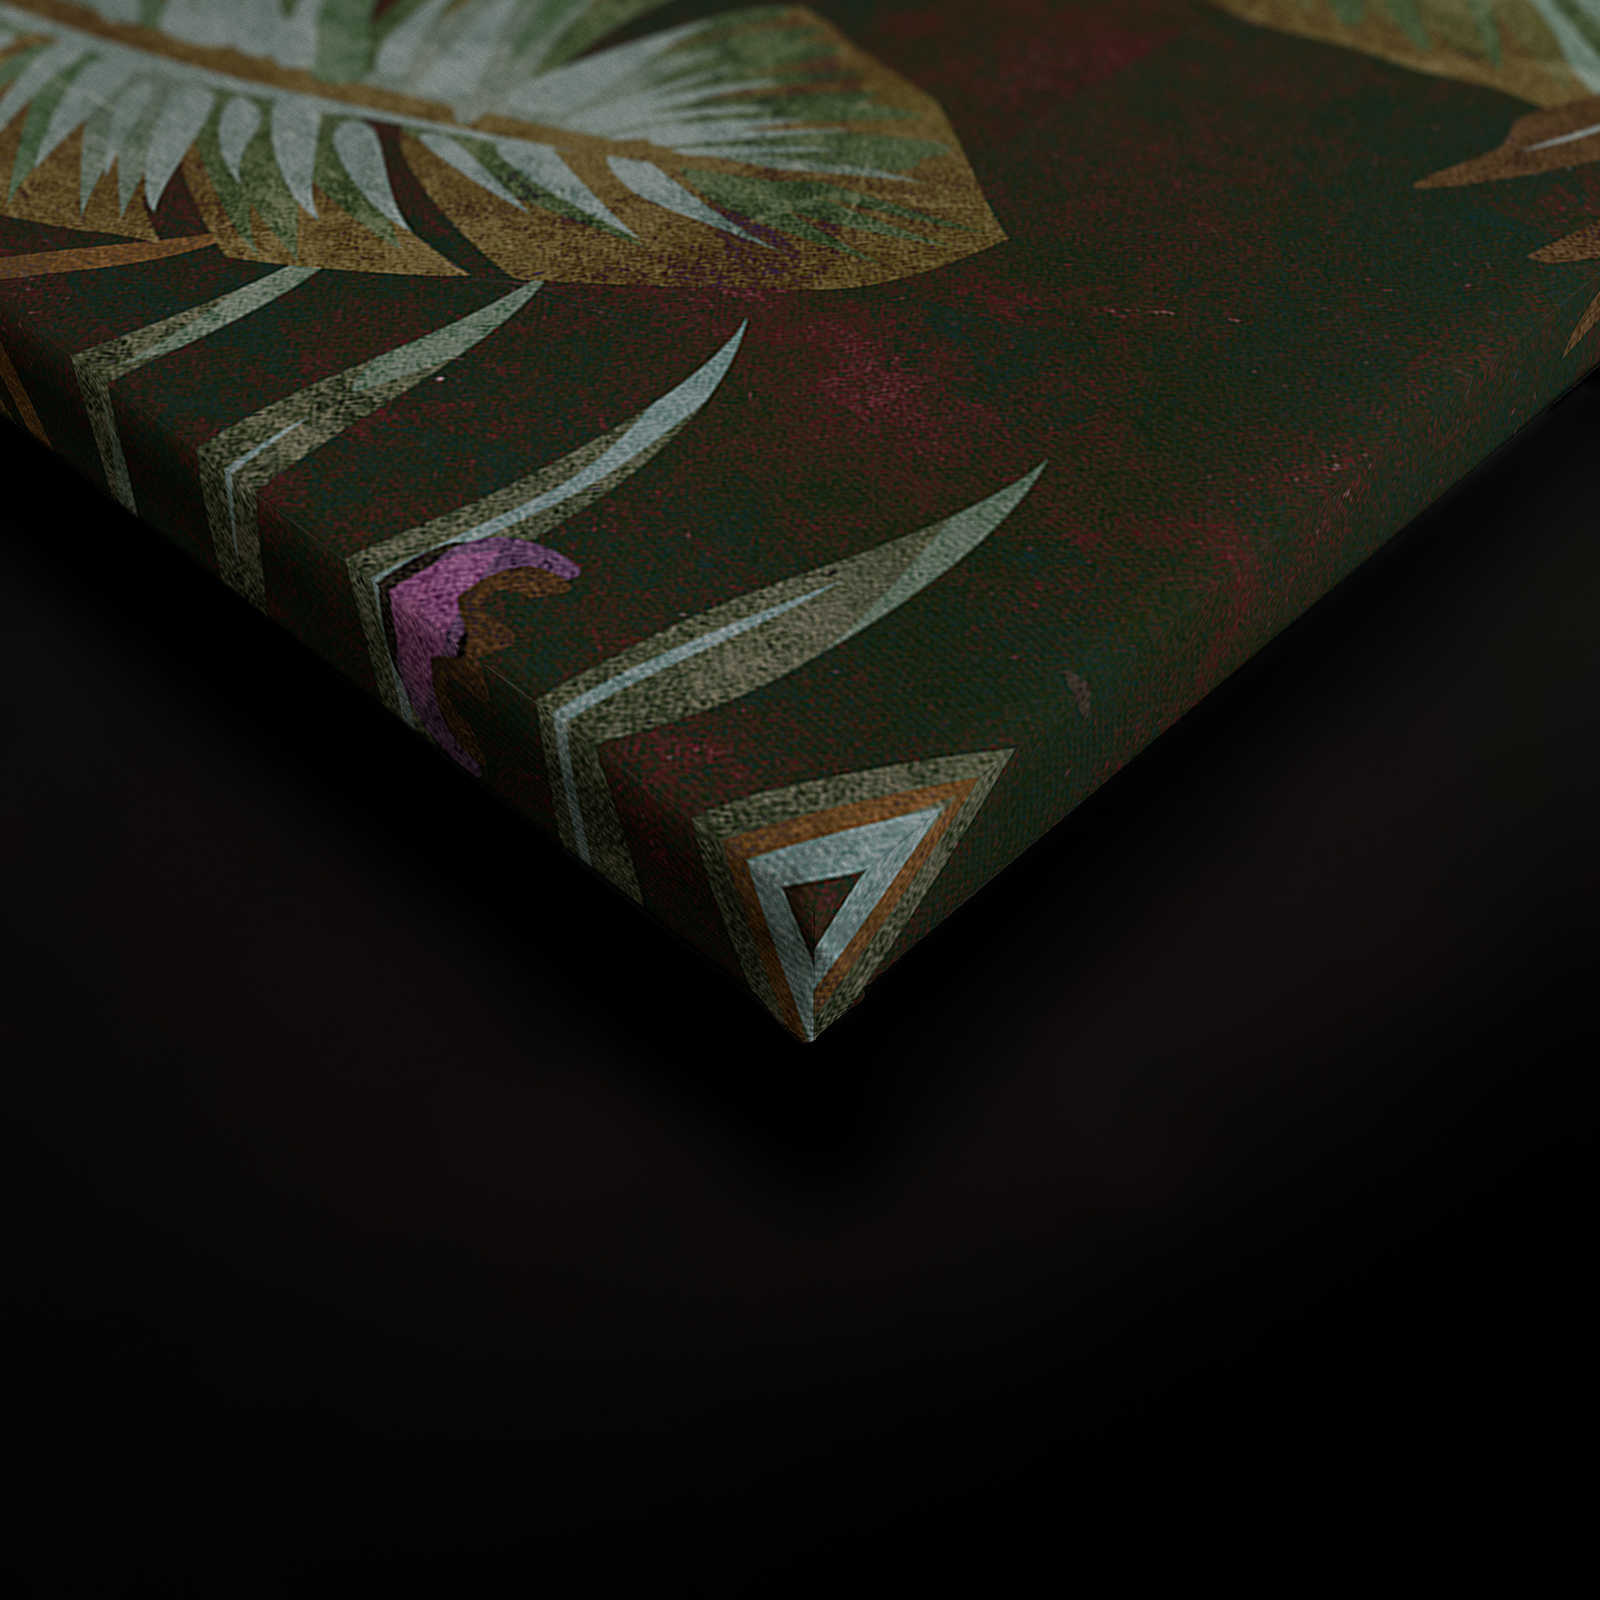             Tropicana 1 - Jungle Canvas Painting with Banana Leaves & Ferns - 0.90 m x 0.60 m
        